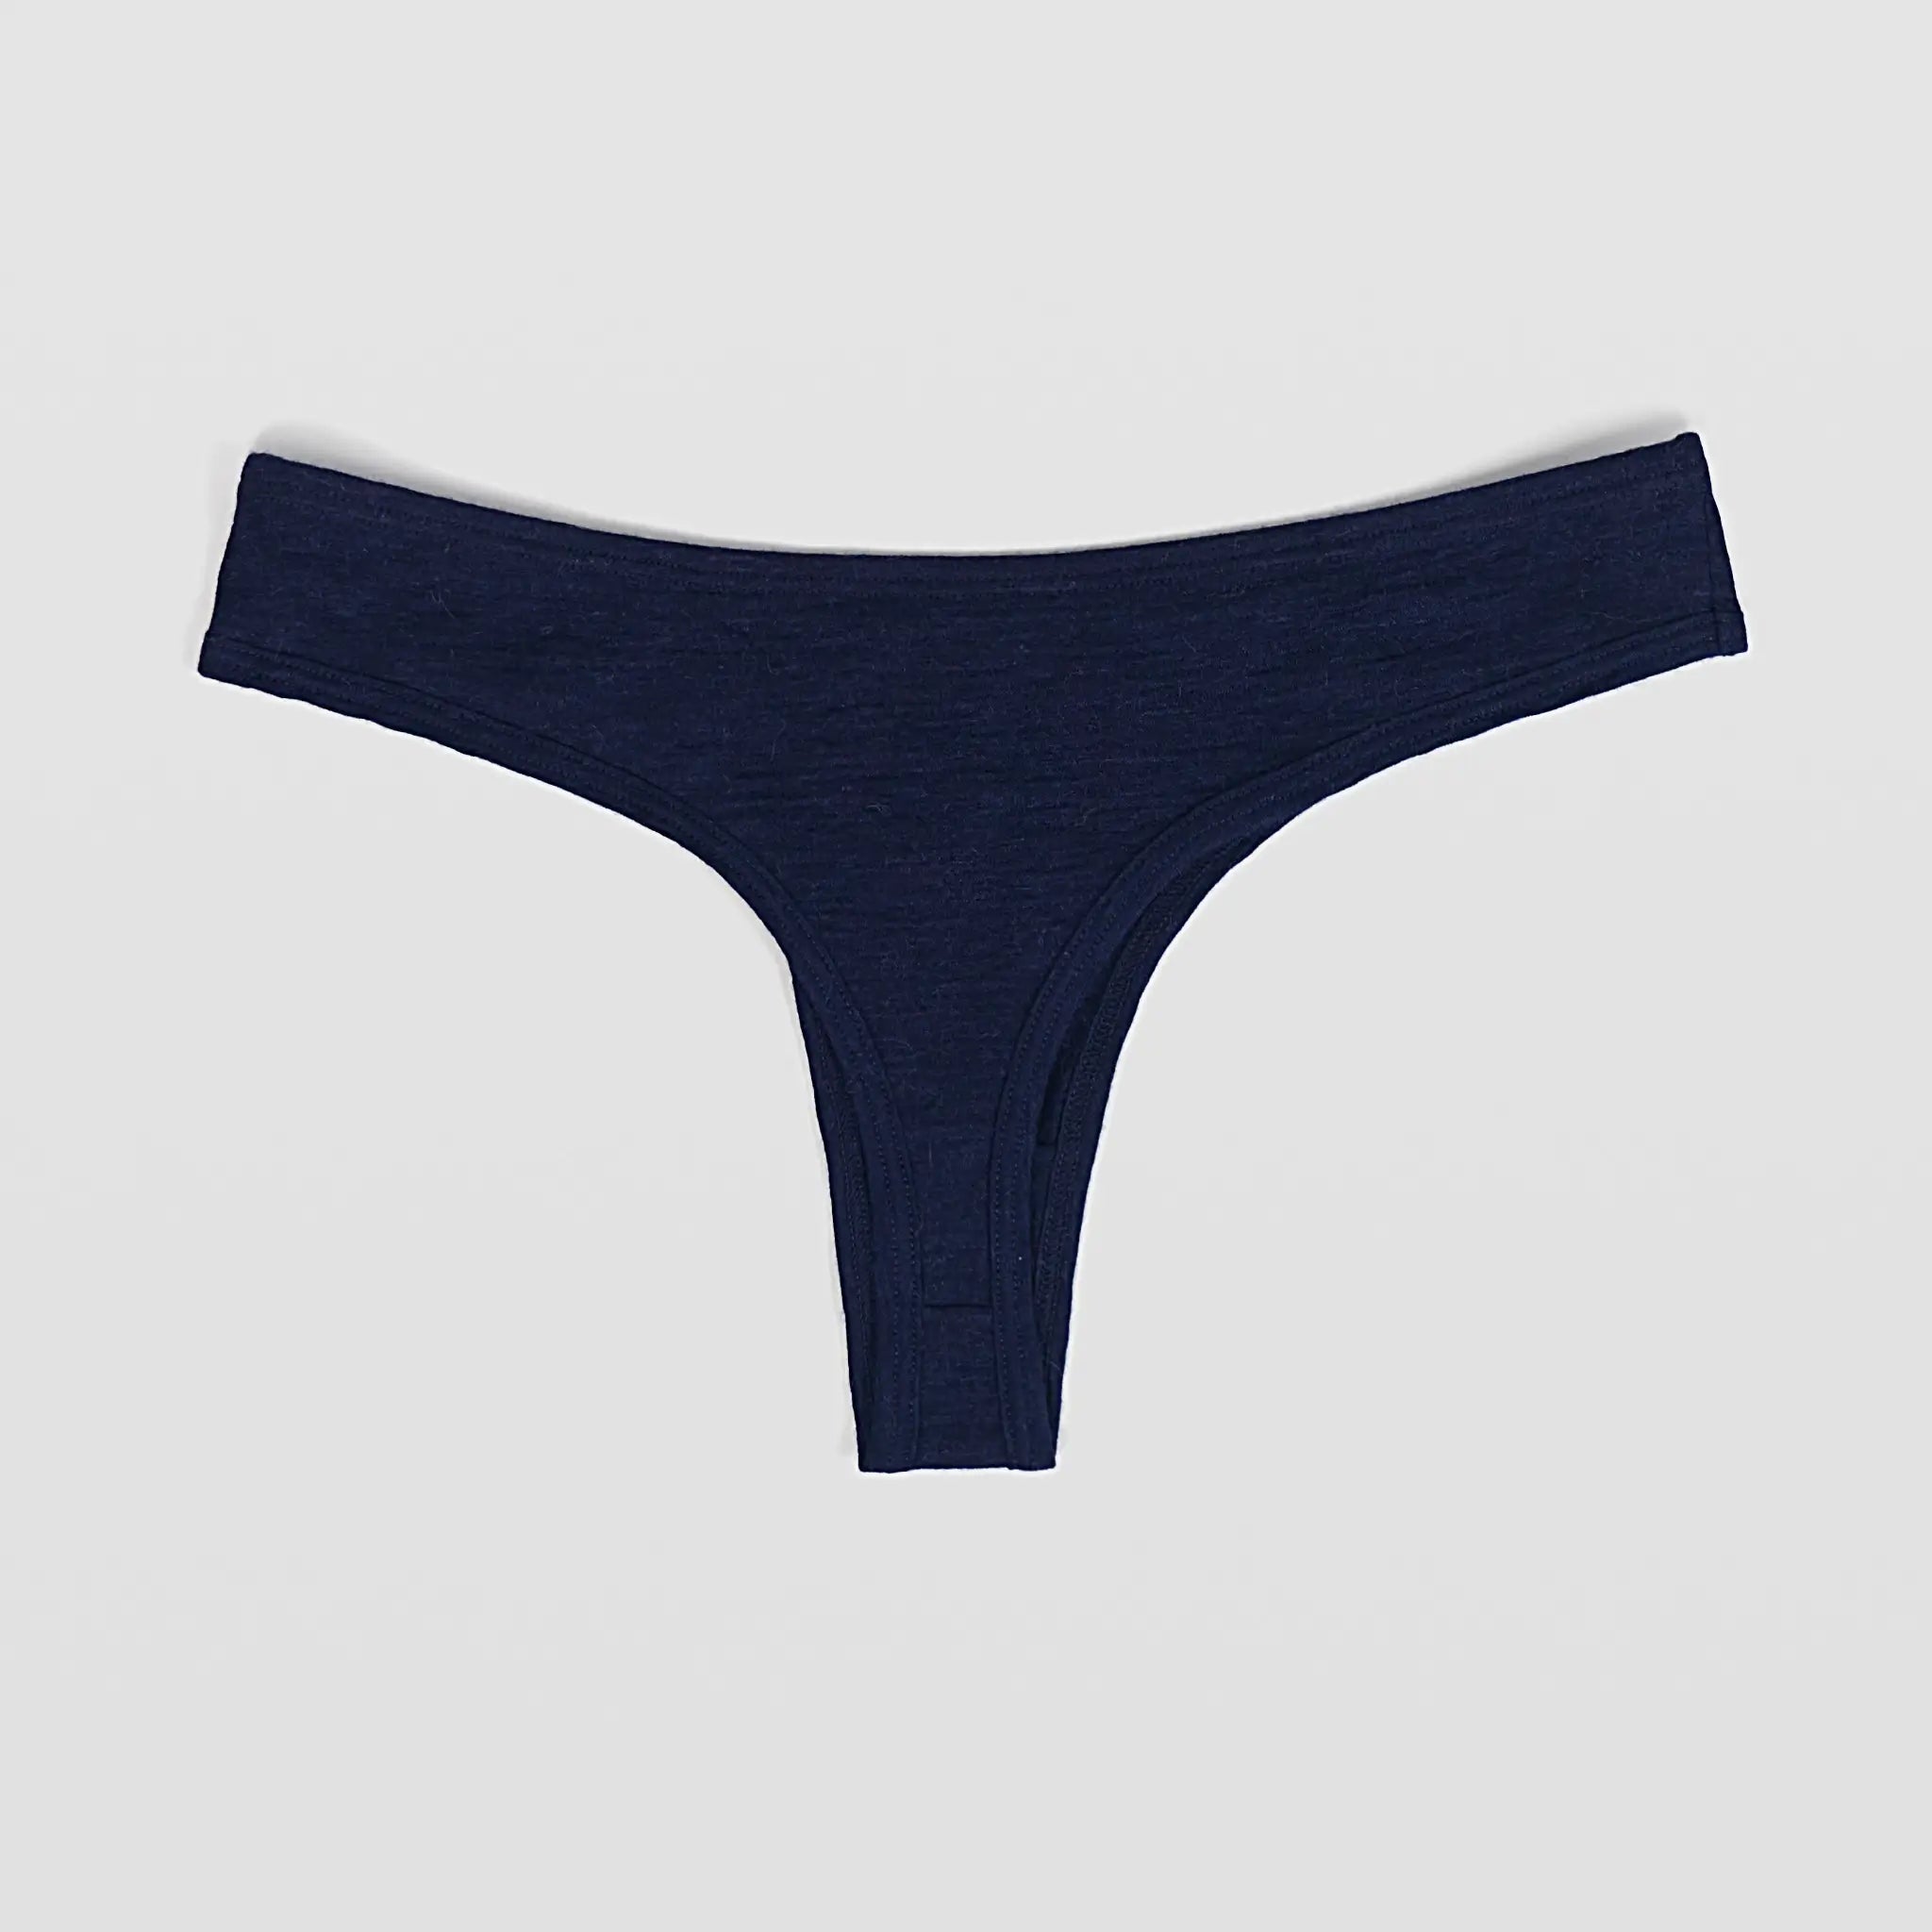 Men's and Women's Underwear Made In the USA Tagged Womens - All